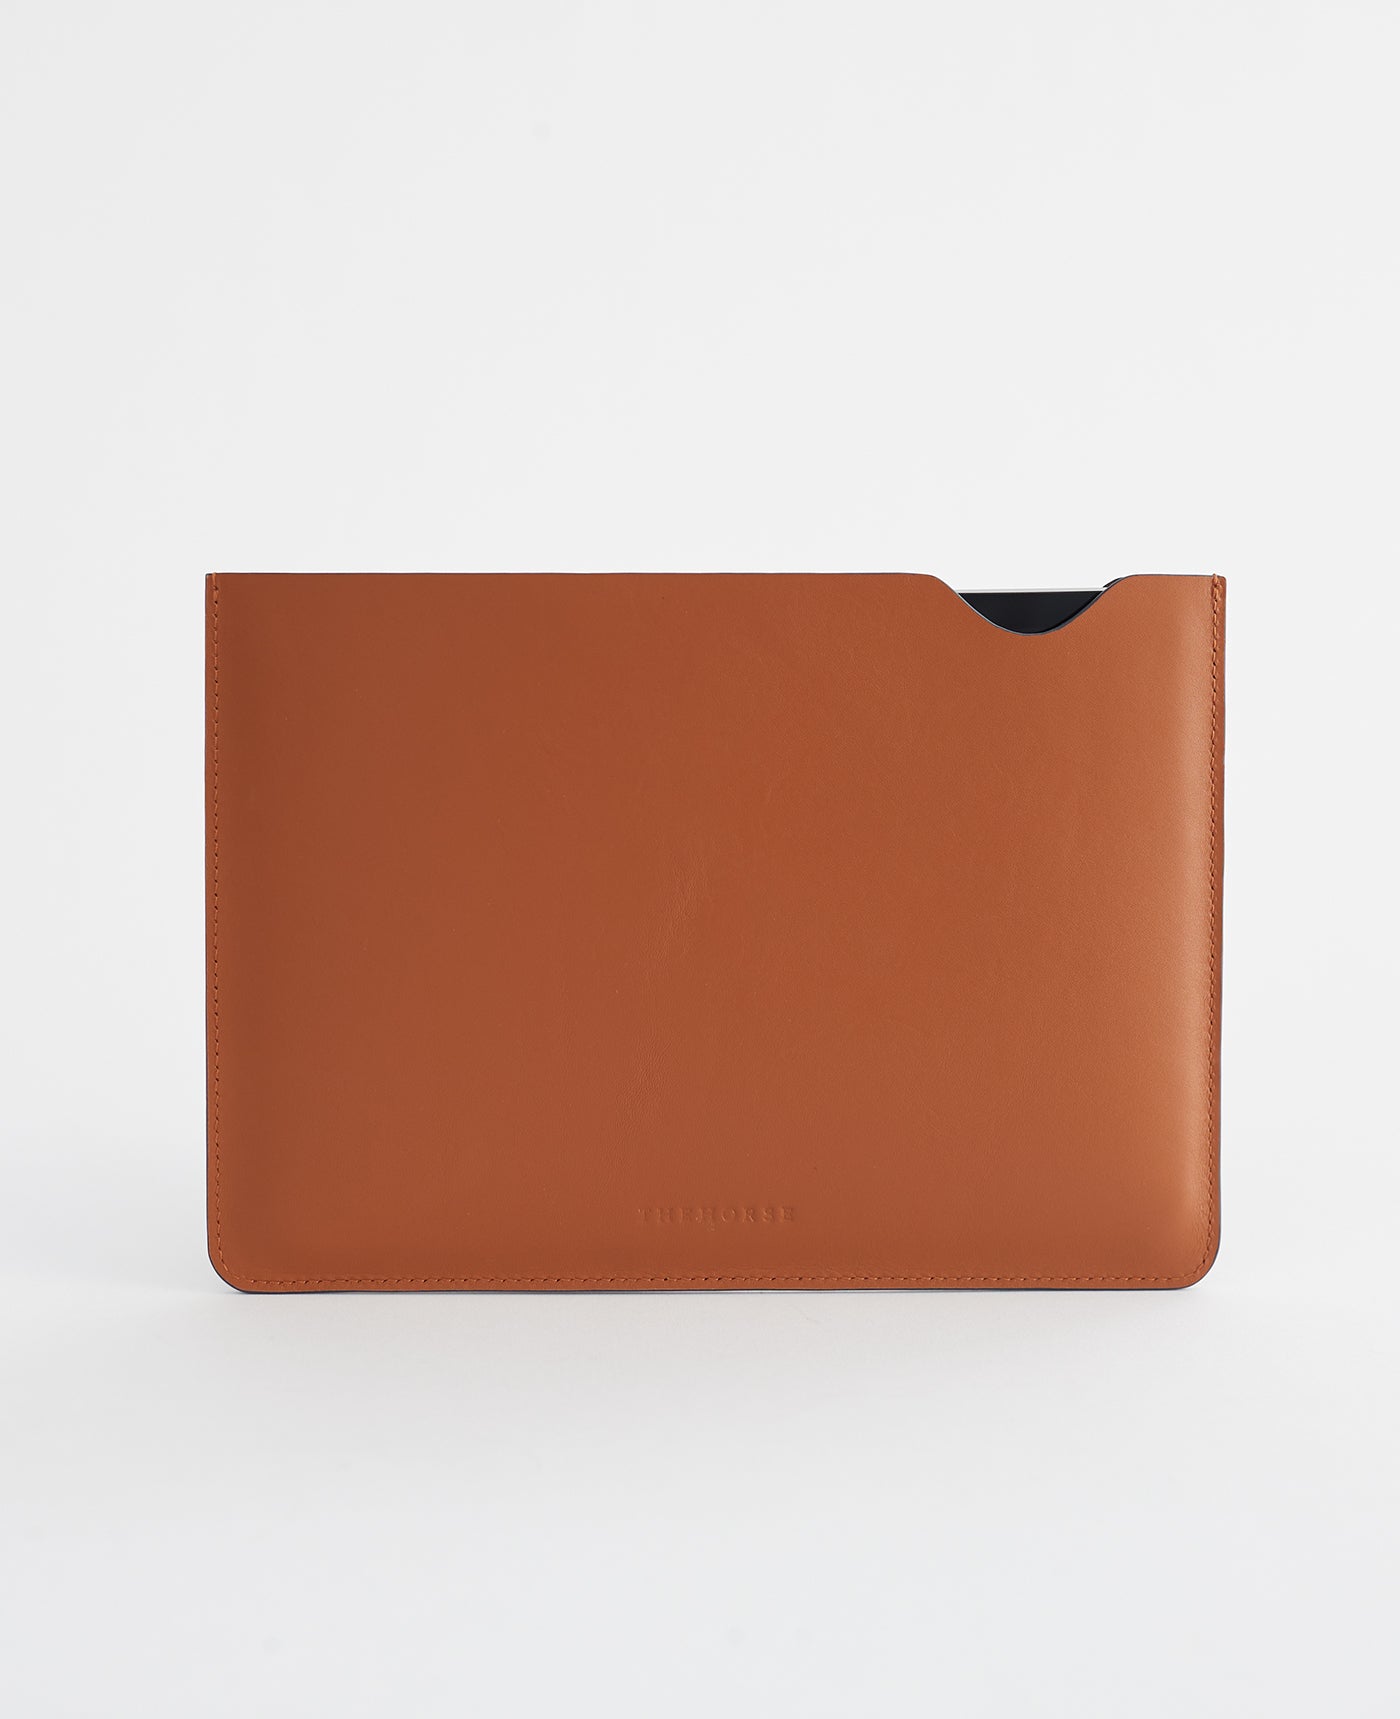 iPad Mini Leather Sleeve in Tan by The Horse®